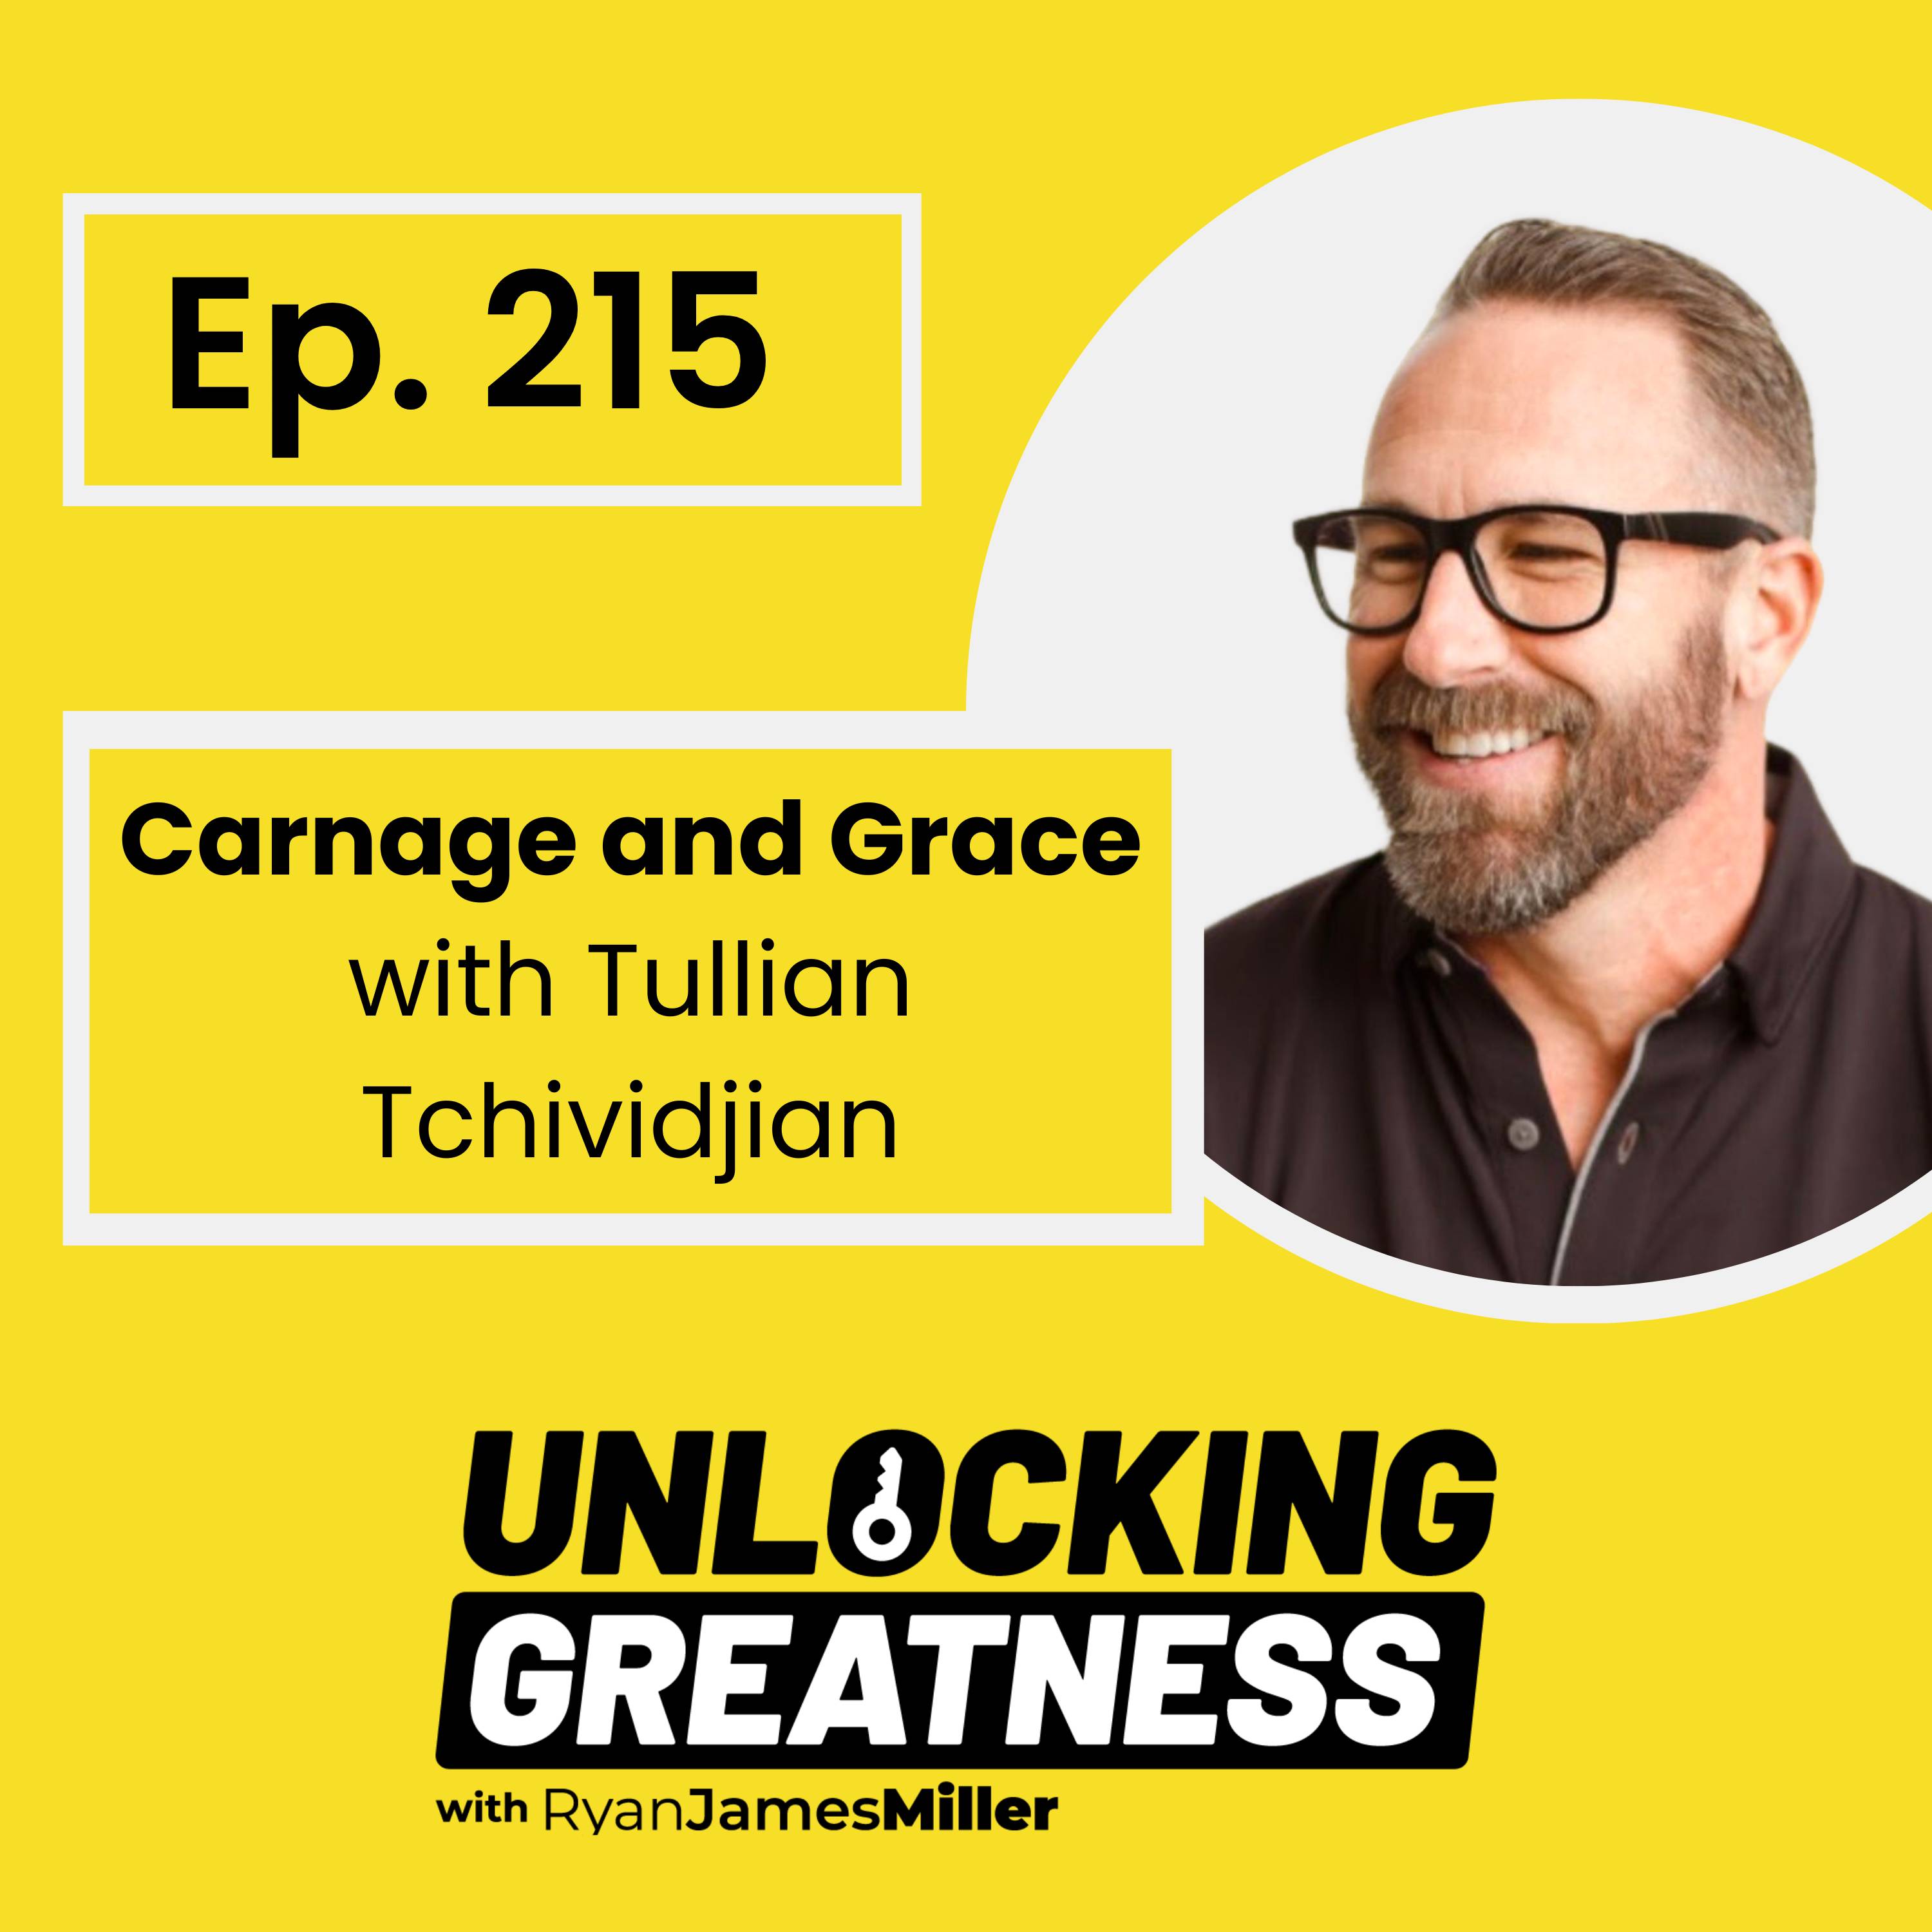 Carnage and Grace, with Tullian Tchividjian